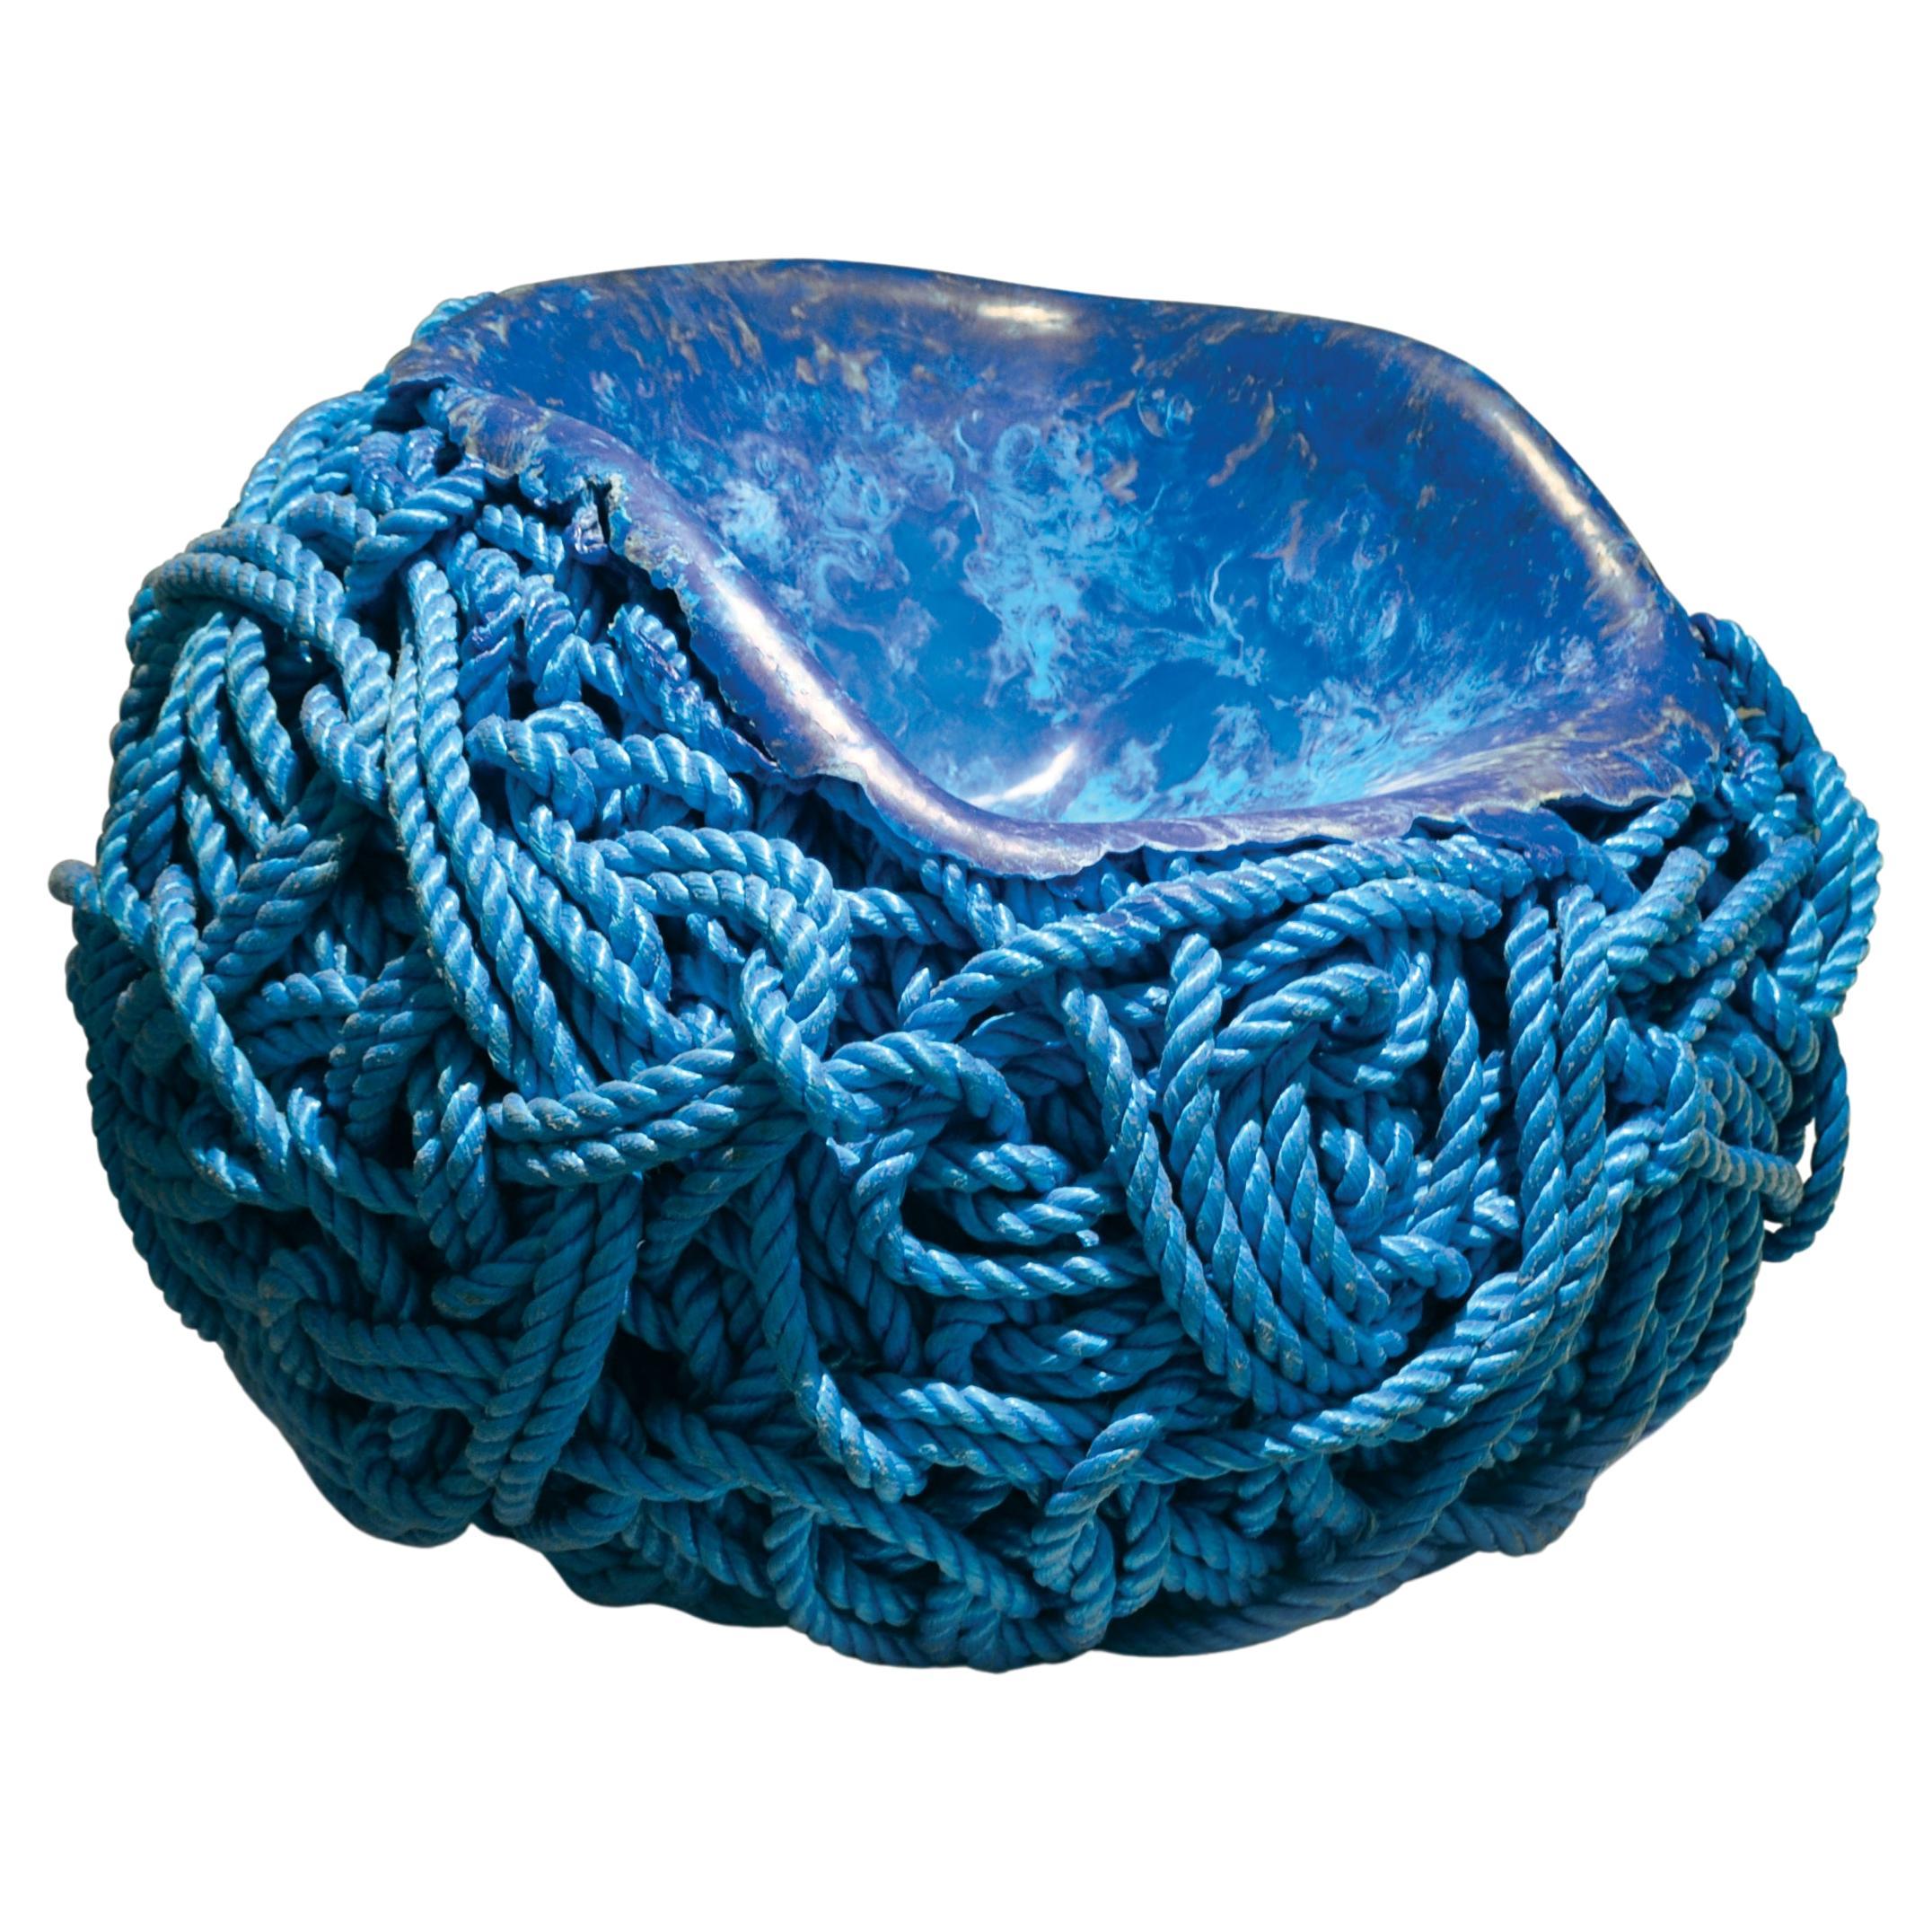 Meltdown Chair, Blue Rope by Tom Price - contemporary